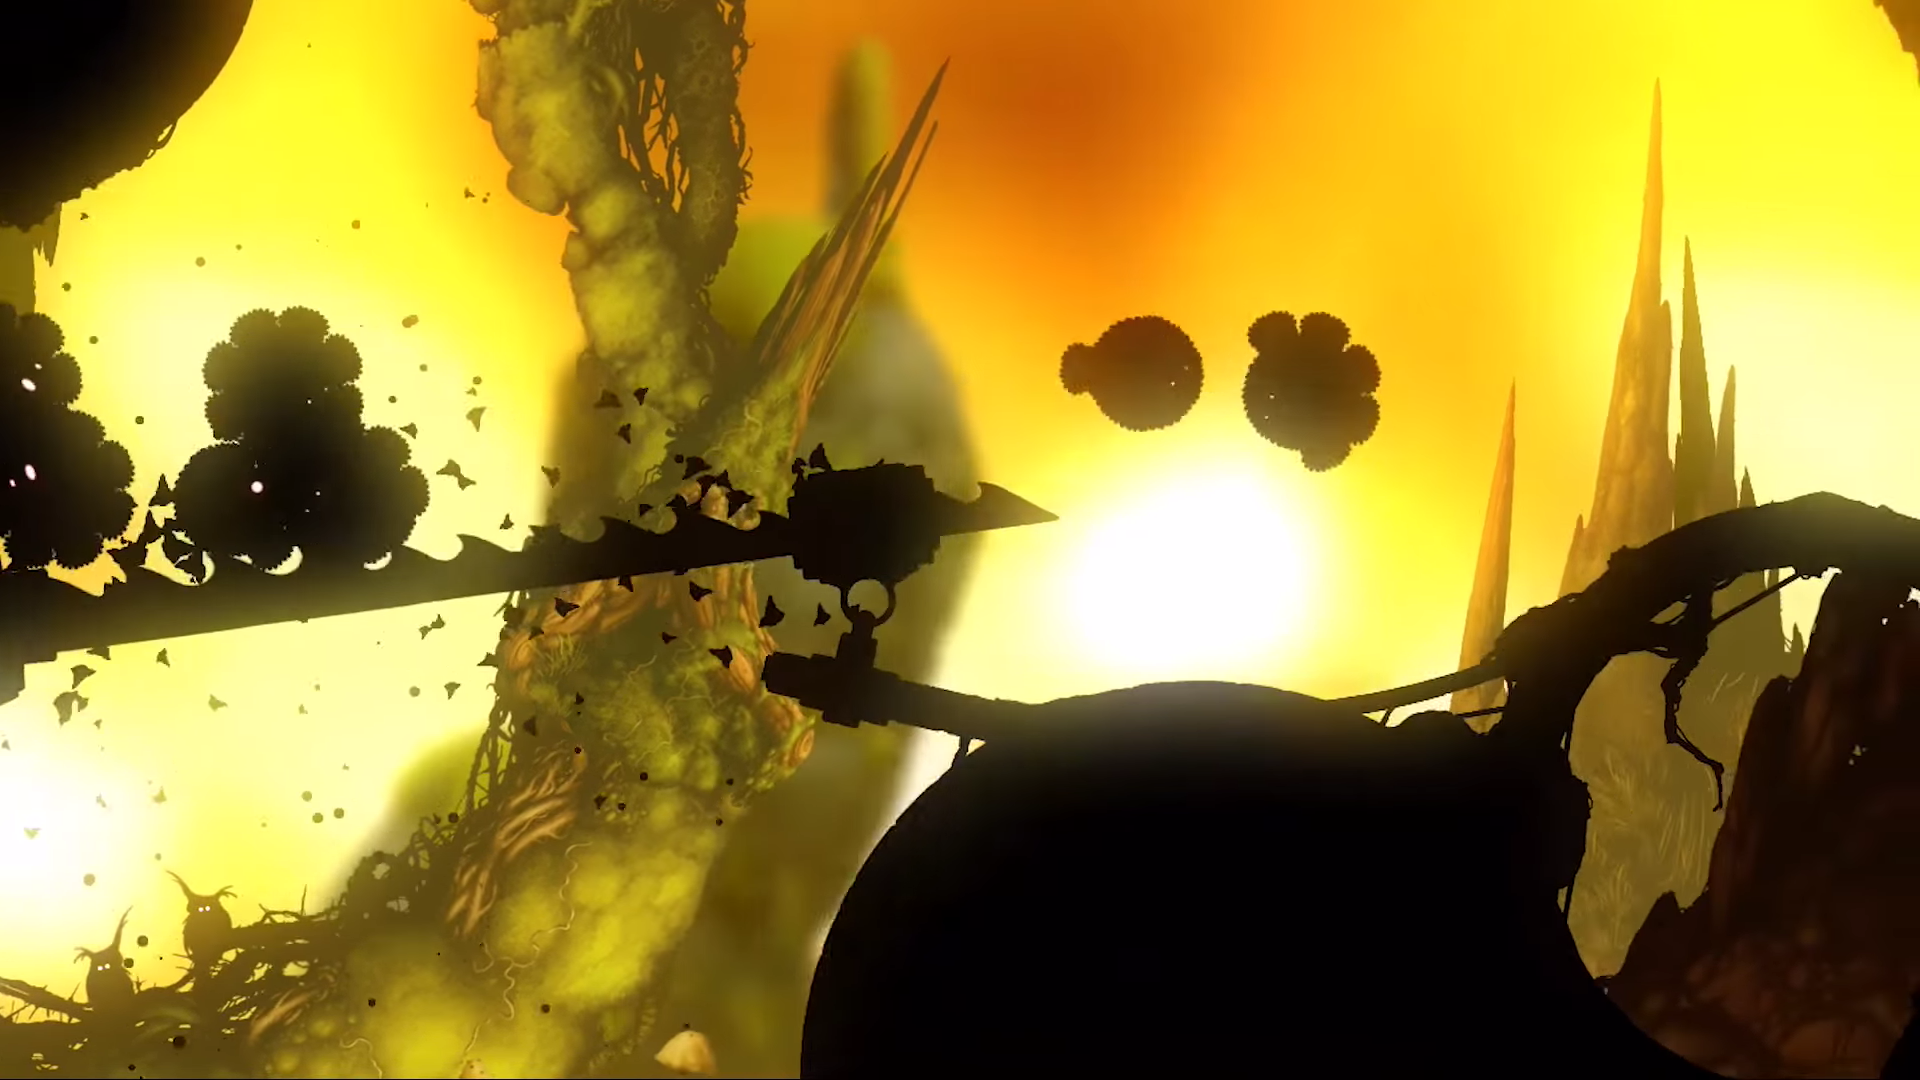 Download badland 2 for android phone